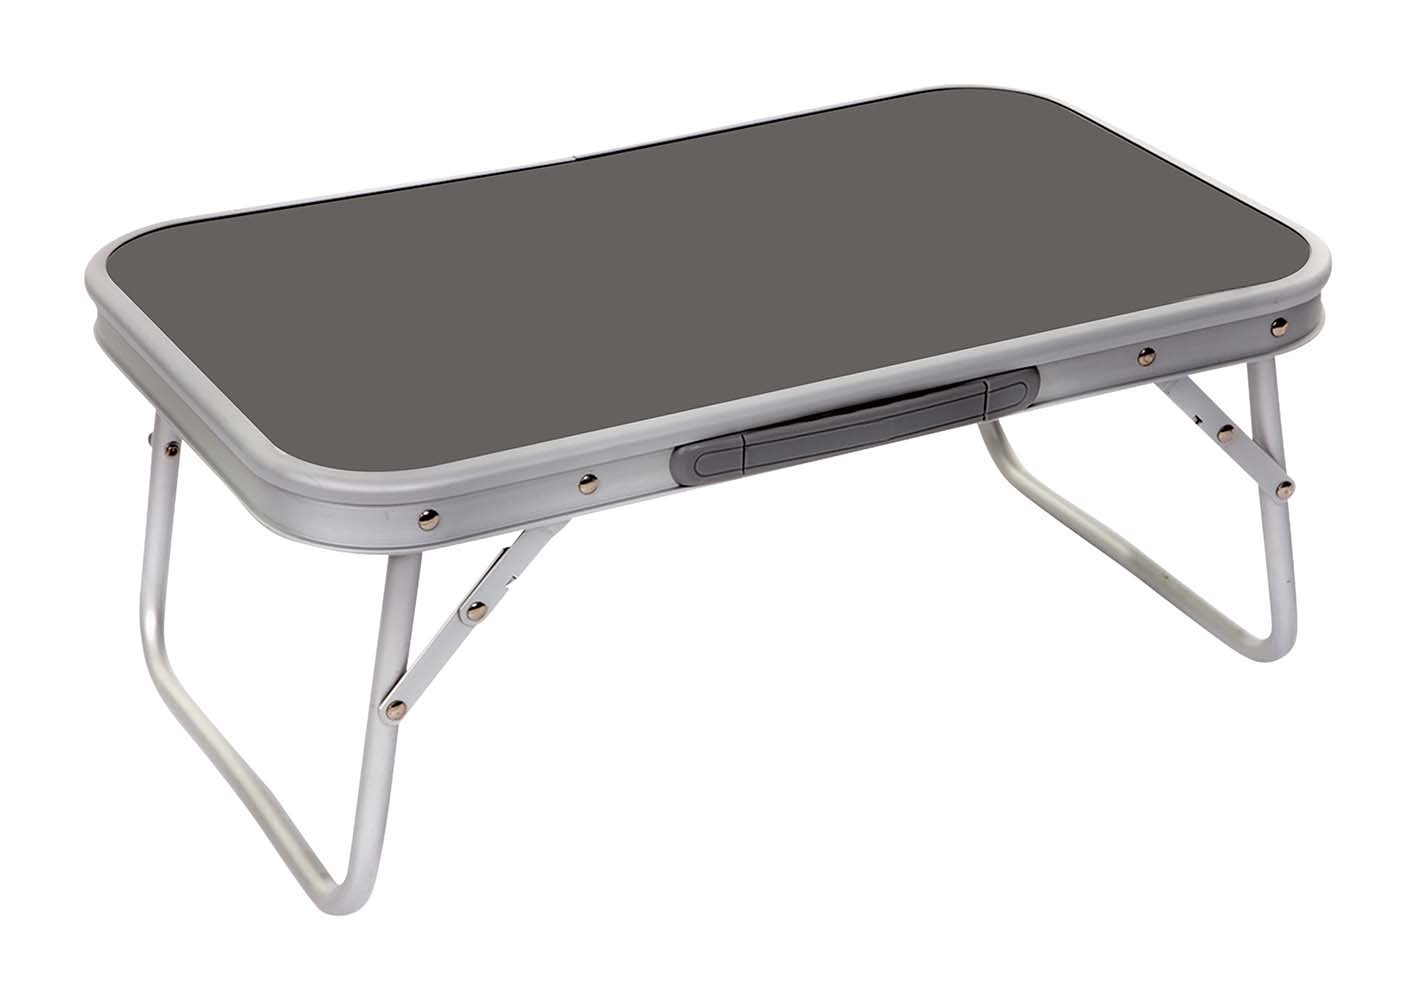 1404359 An extra low and compact table. This folding table is a low model with folding legs. Made from sturdy and light weight aluminium Folded up (LxWxH): 56x34x3.5 centimetres.